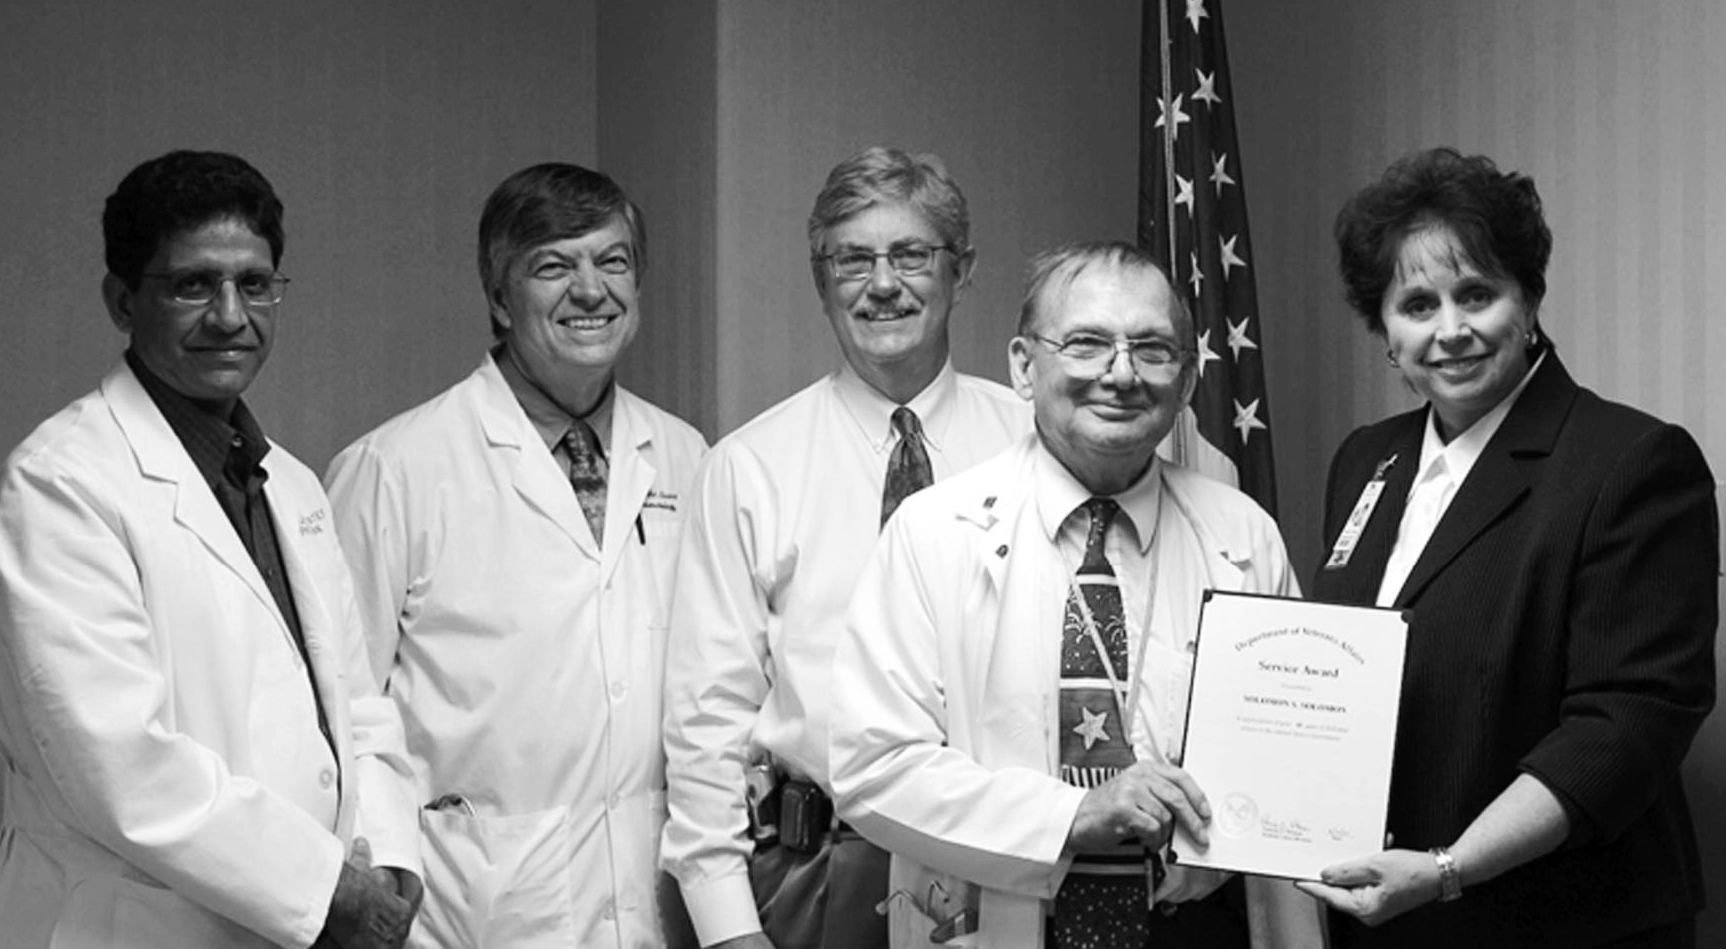 Dr. Sol Solomon, chief of endocrinology and metabolism, Memphis VA Medical Center, received an award in 2007 for 40 years of federal service.